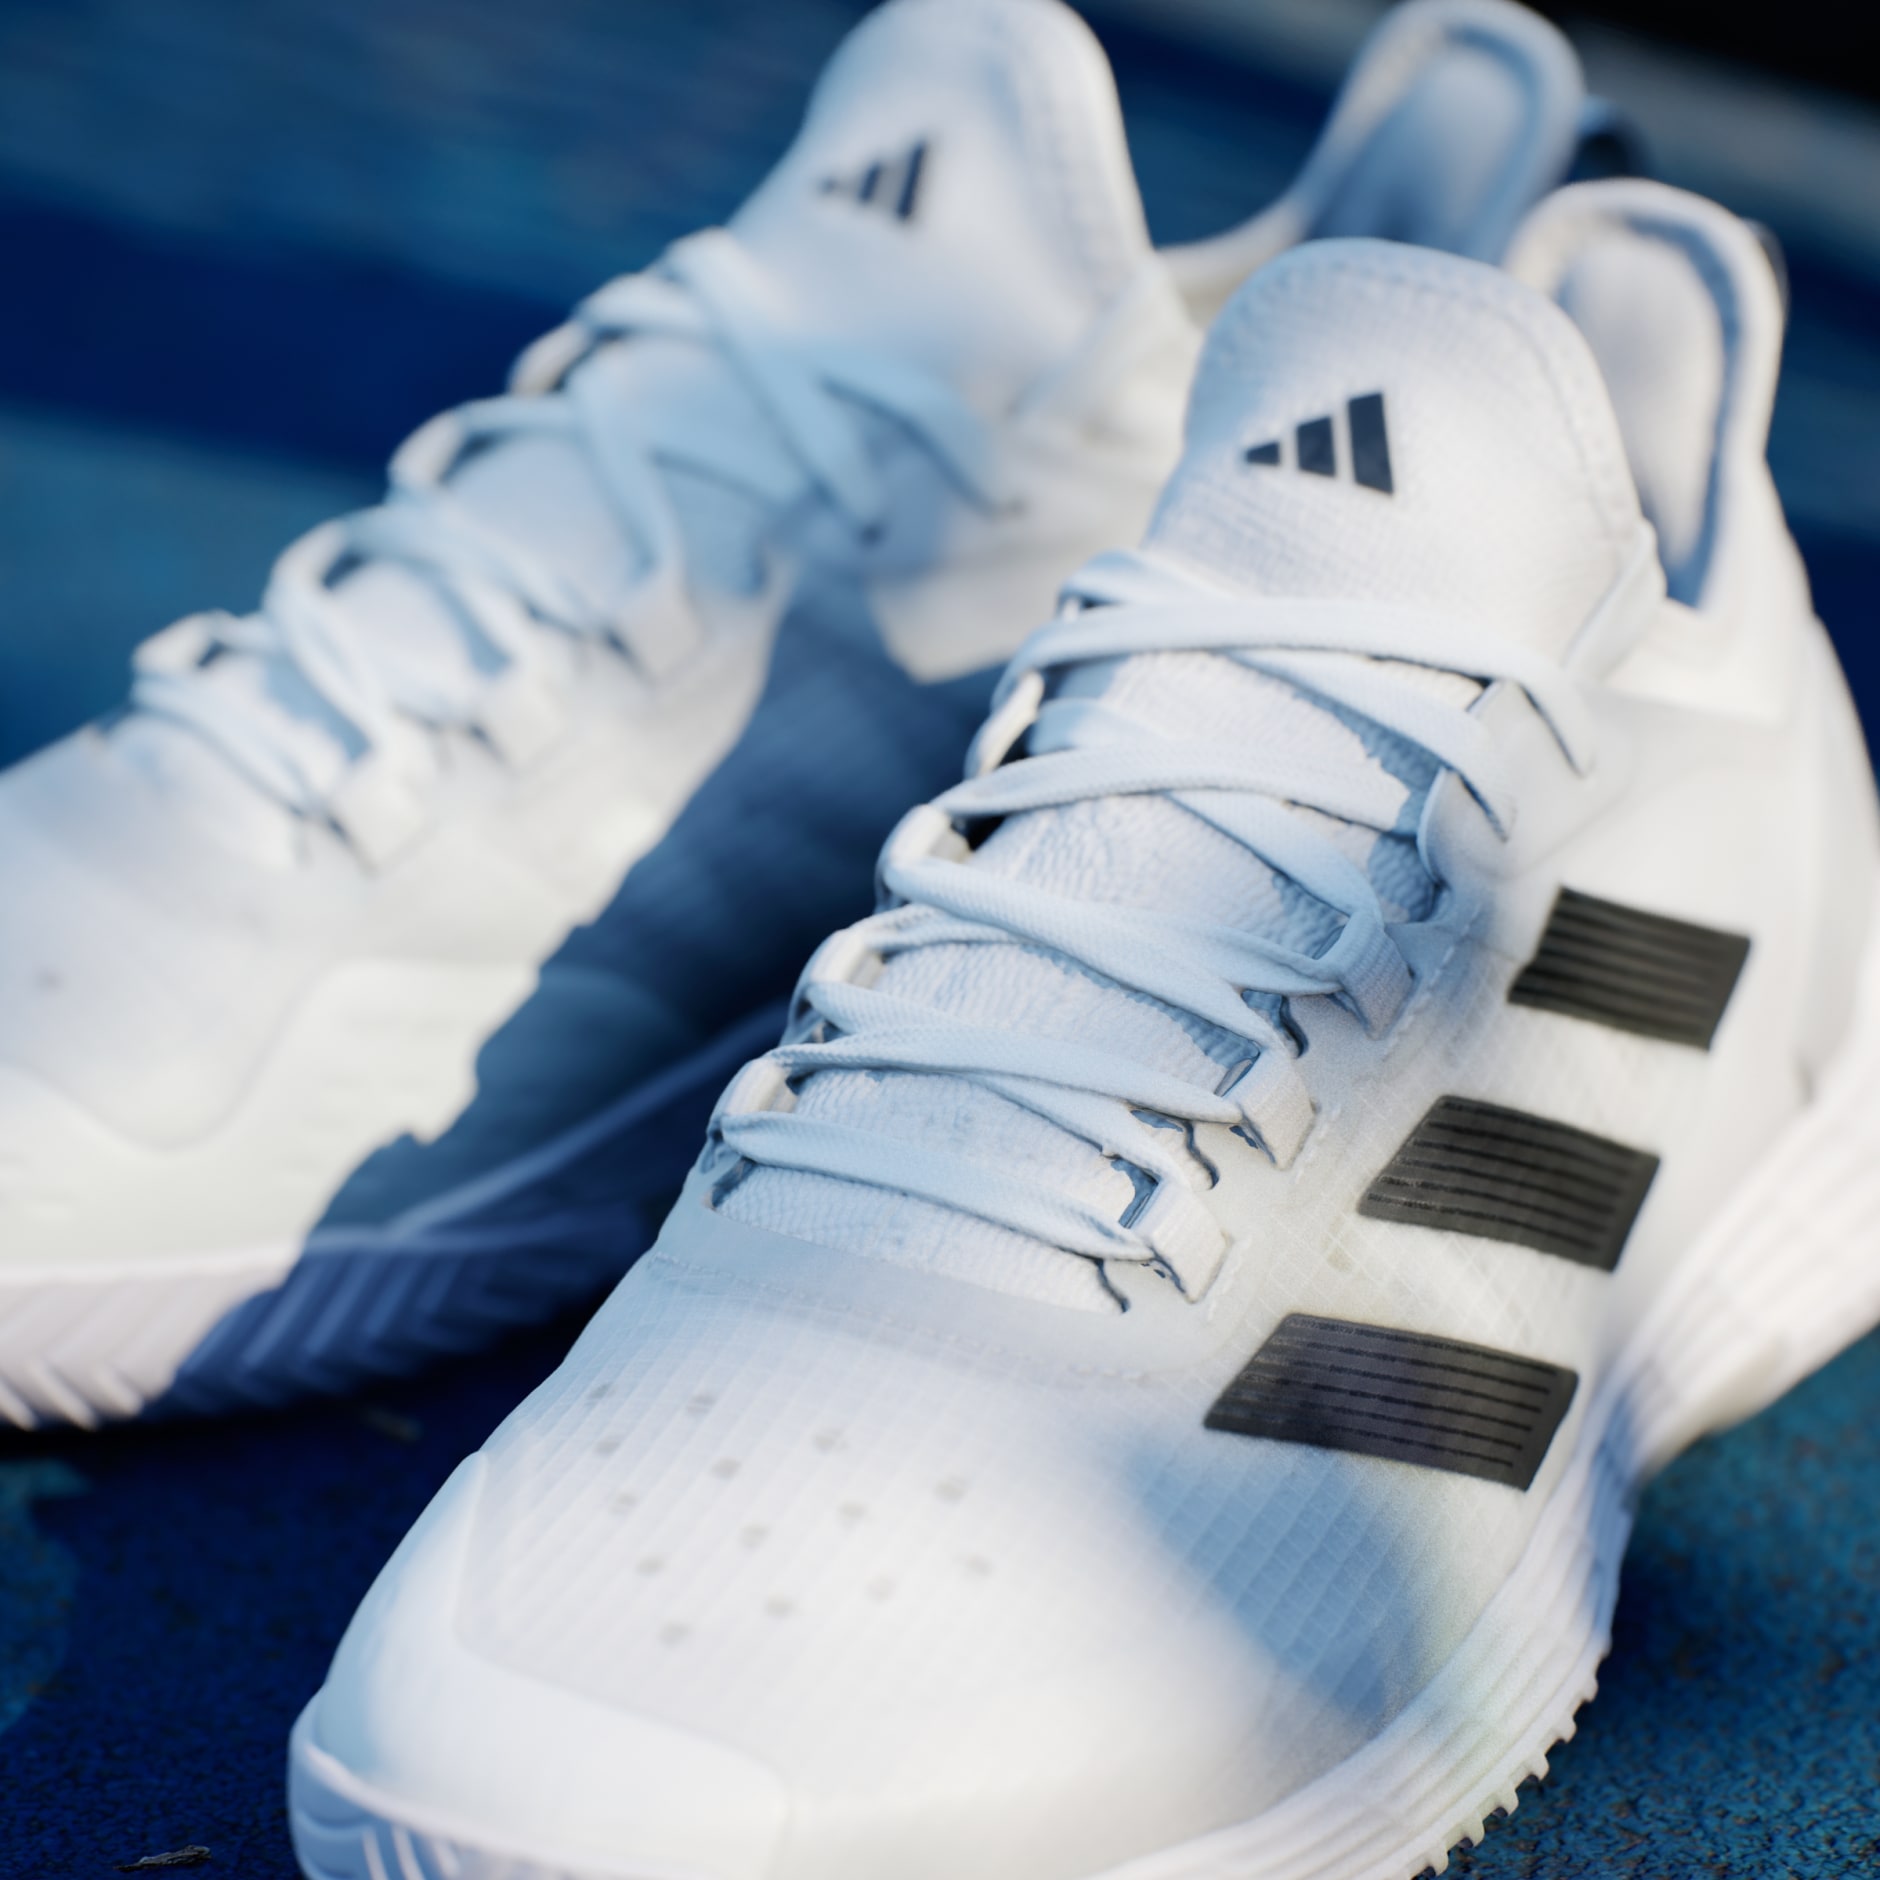 Shoes - Adizero Ubersonic 4.1 Tennis Shoes - White | adidas South Africa